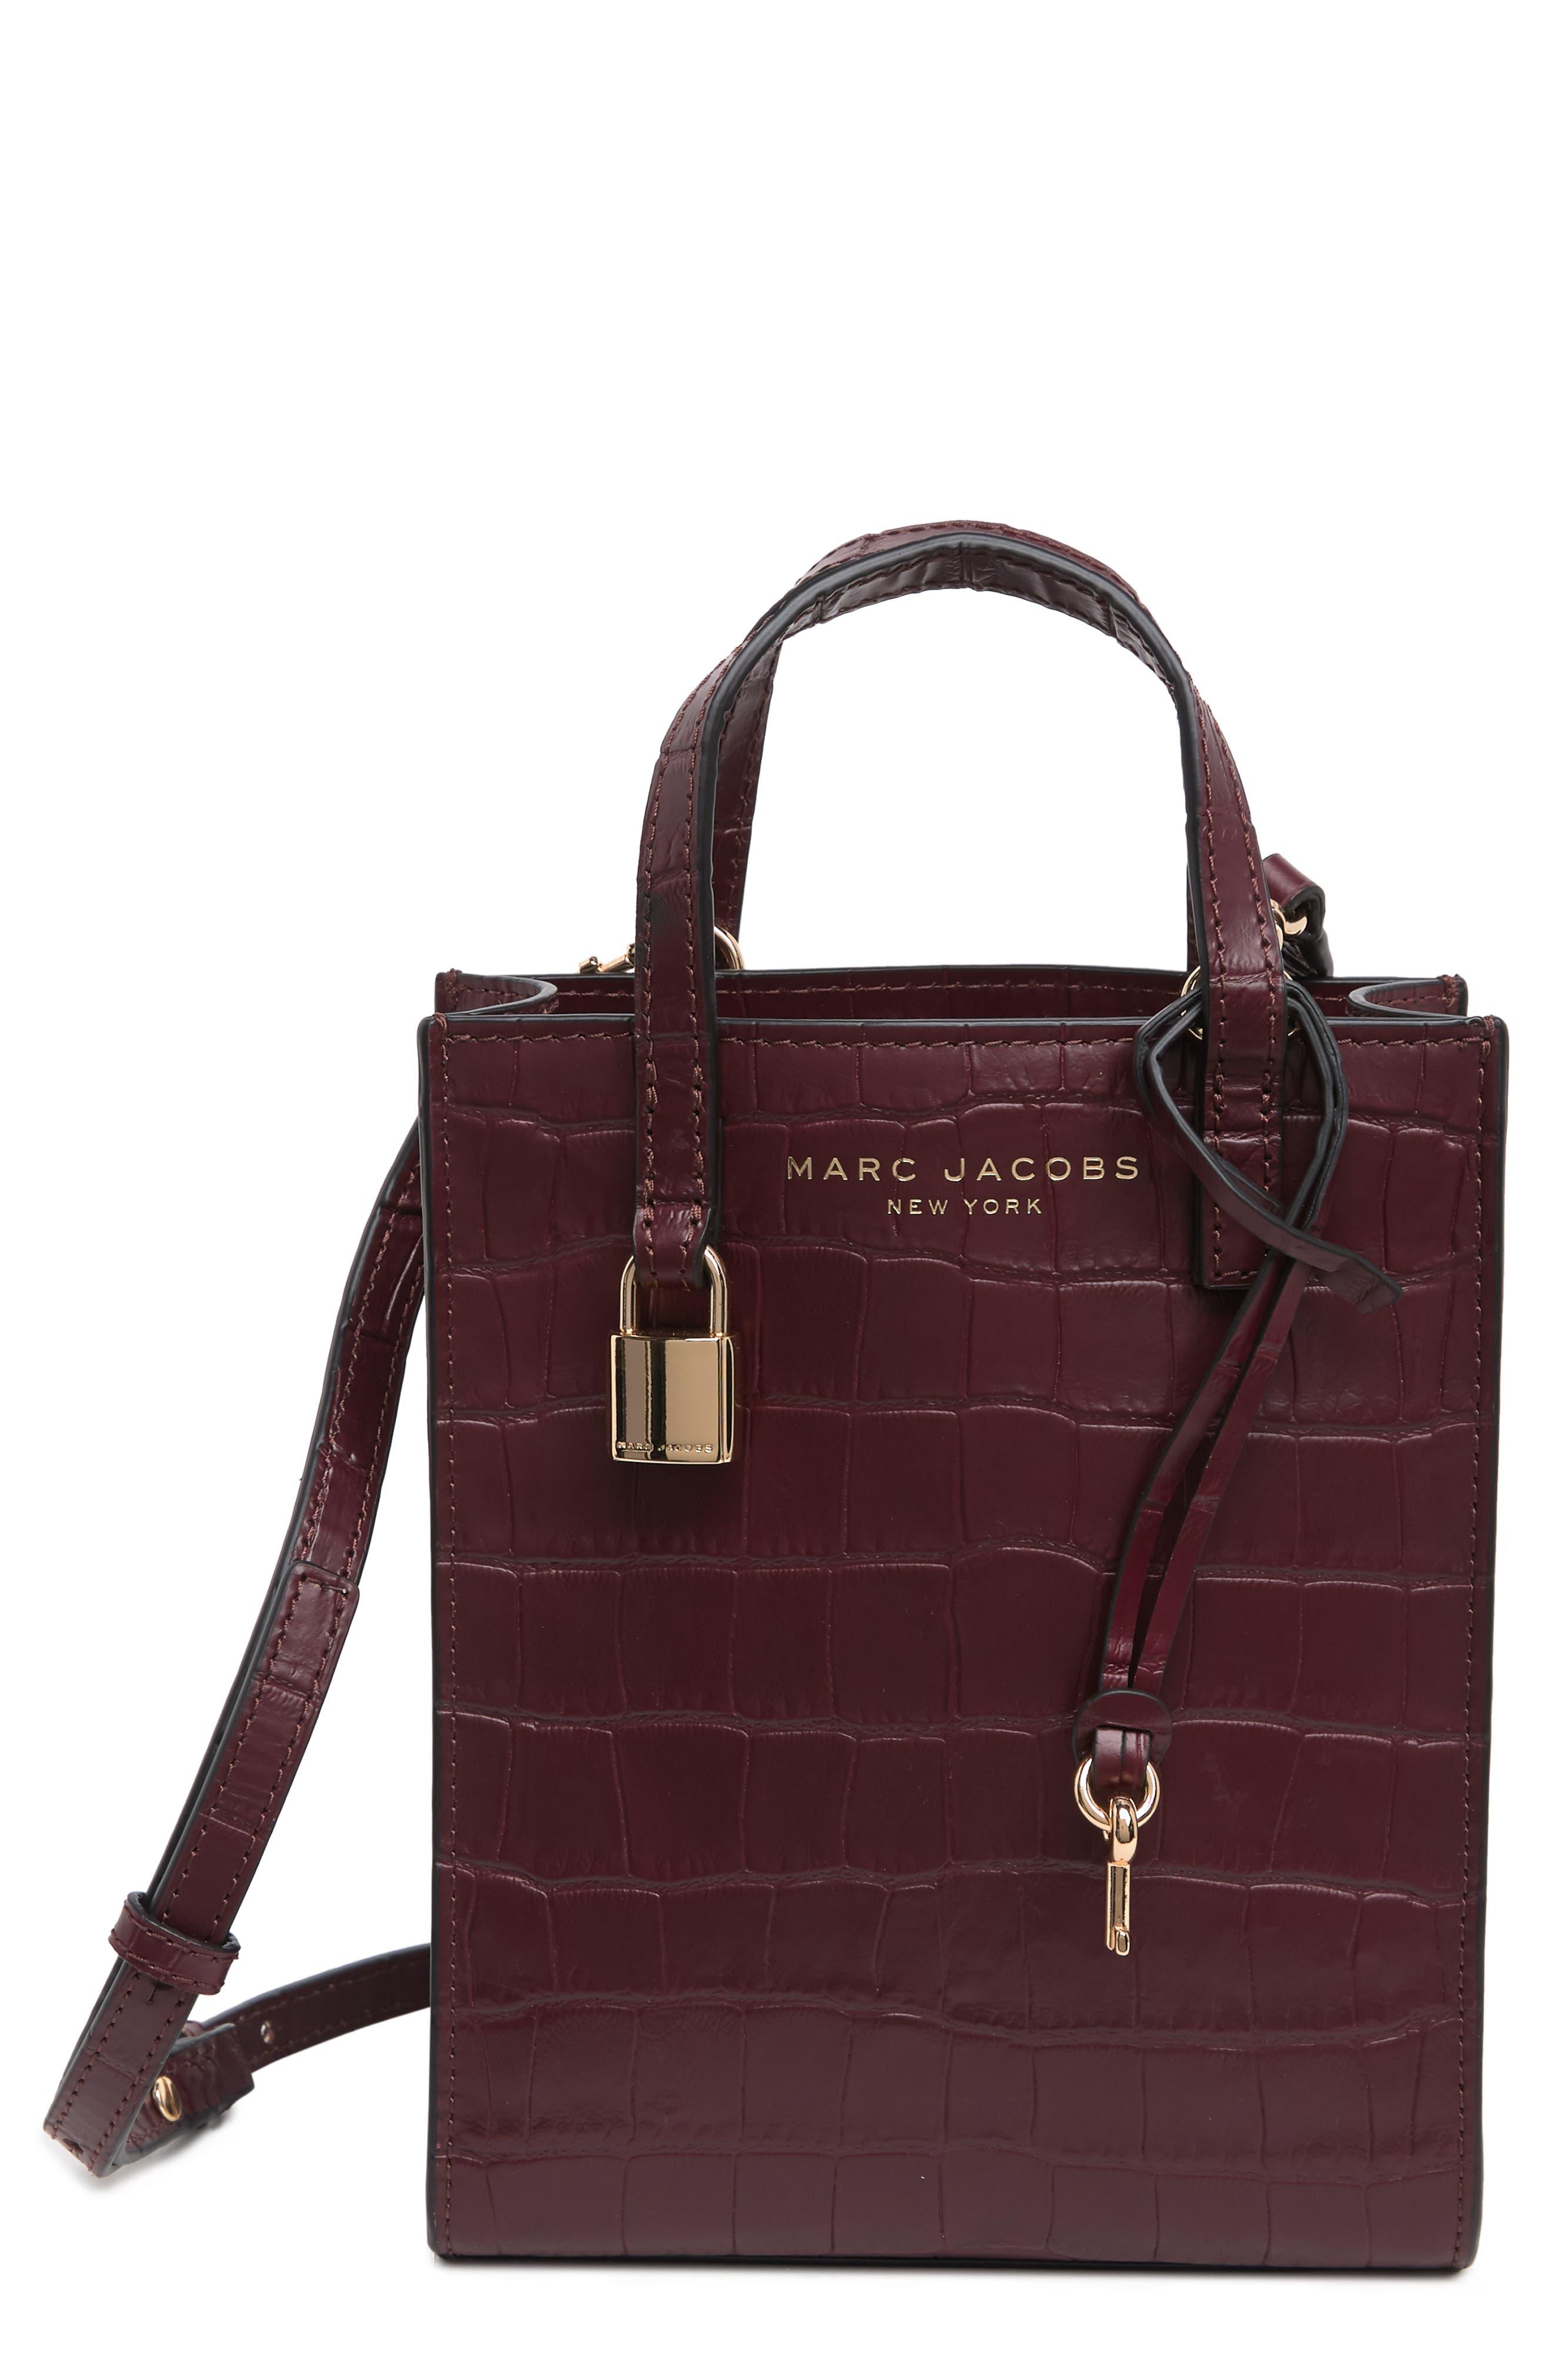 Marc Jacobs Tote Bags Cheapest Price - Womens Leather Micro Brown